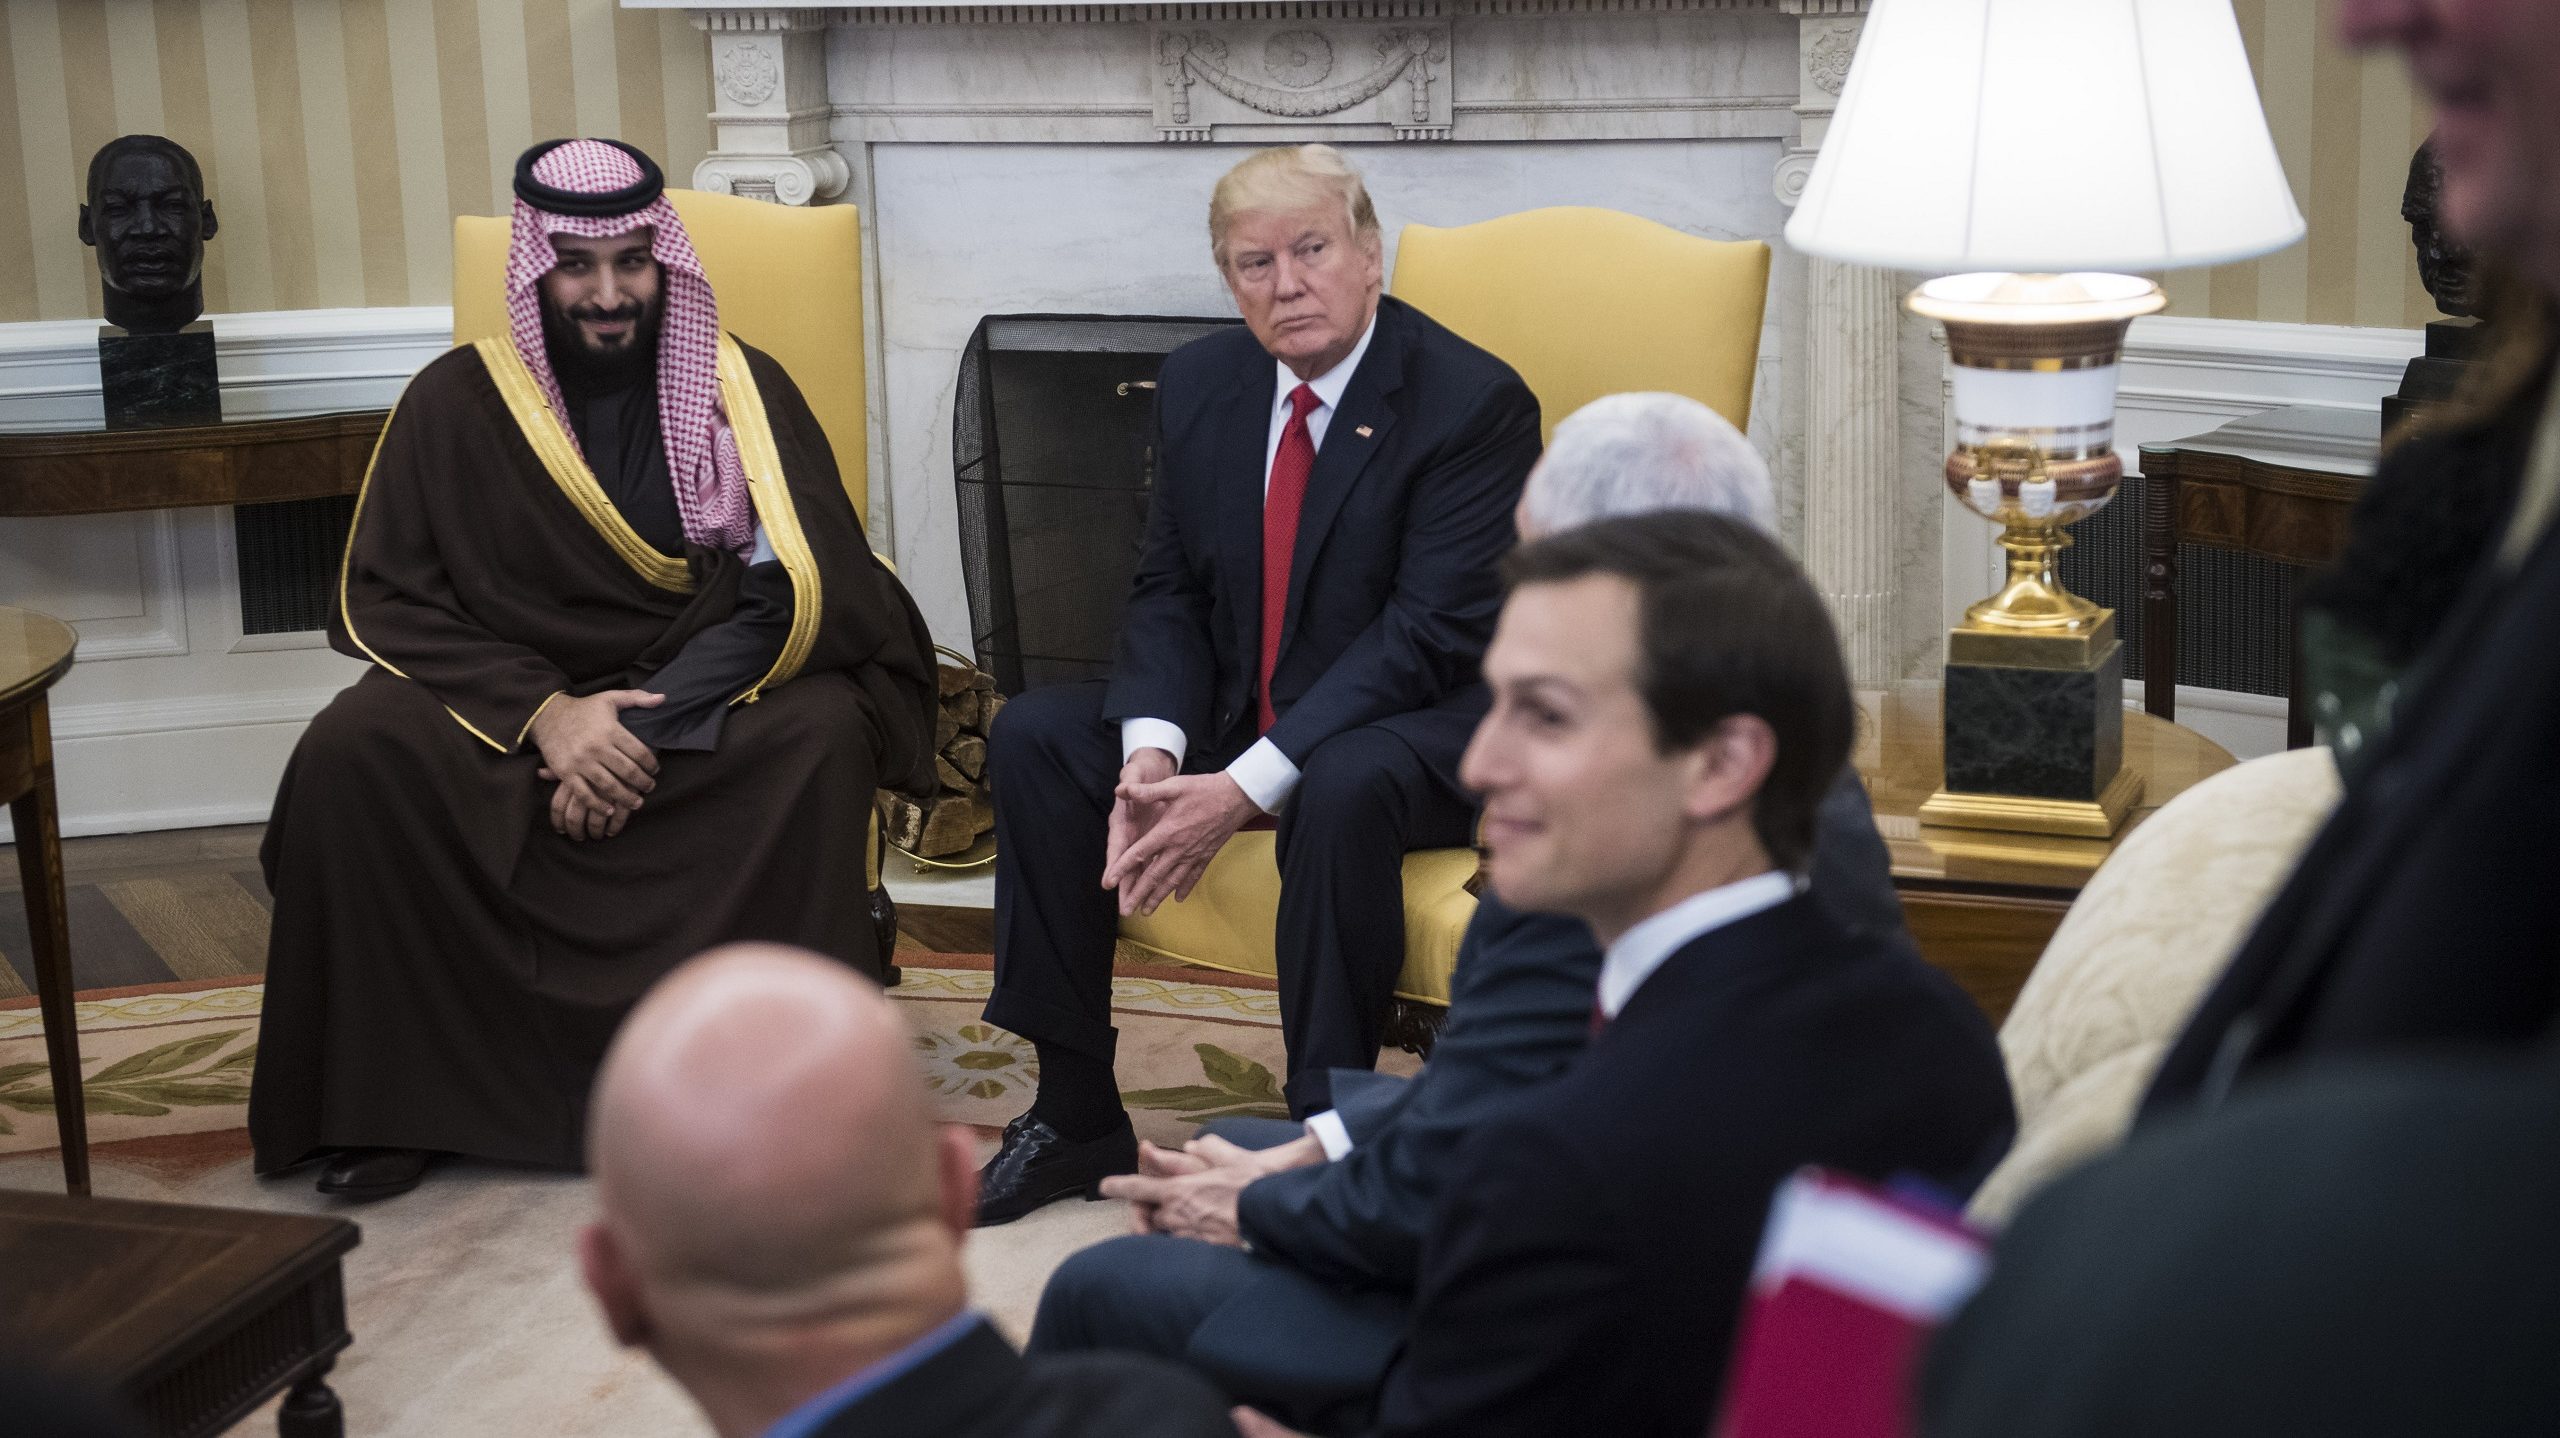 $2B Saudi Investment in Jared Kushner’s Private Equity Fund Signals Openness to Israel